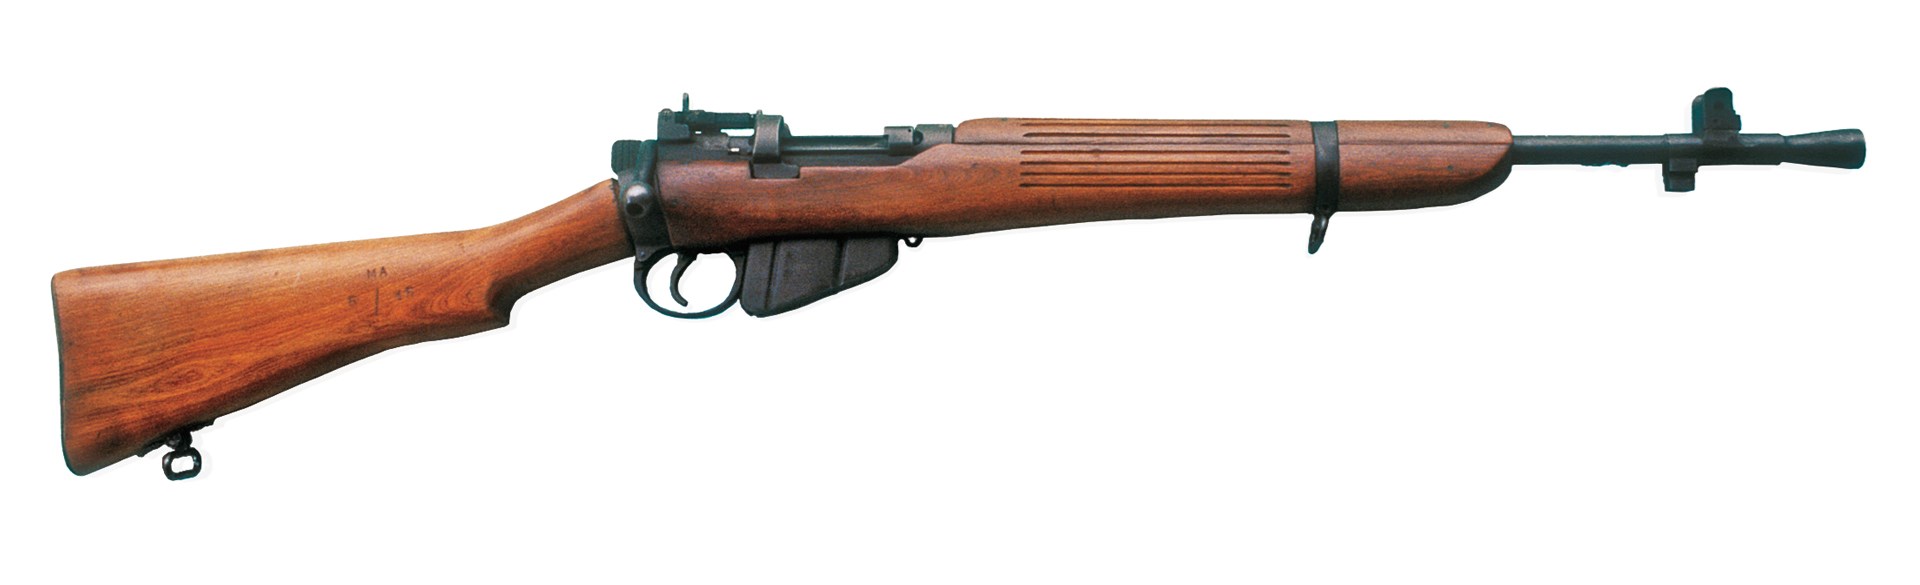 The Australian “No. 6” rifle was based on the Lithgow-made No. 1, Mk. III* action but otherwise resembles the British No. 5 “Jungle Carbine.” It has a flip-up aperture rear sight at the rear of the receiver. There were only 200 No. 6s produced in two marks, Mk. I and Mk. I/I. This Mk. I example was made in May 1945.